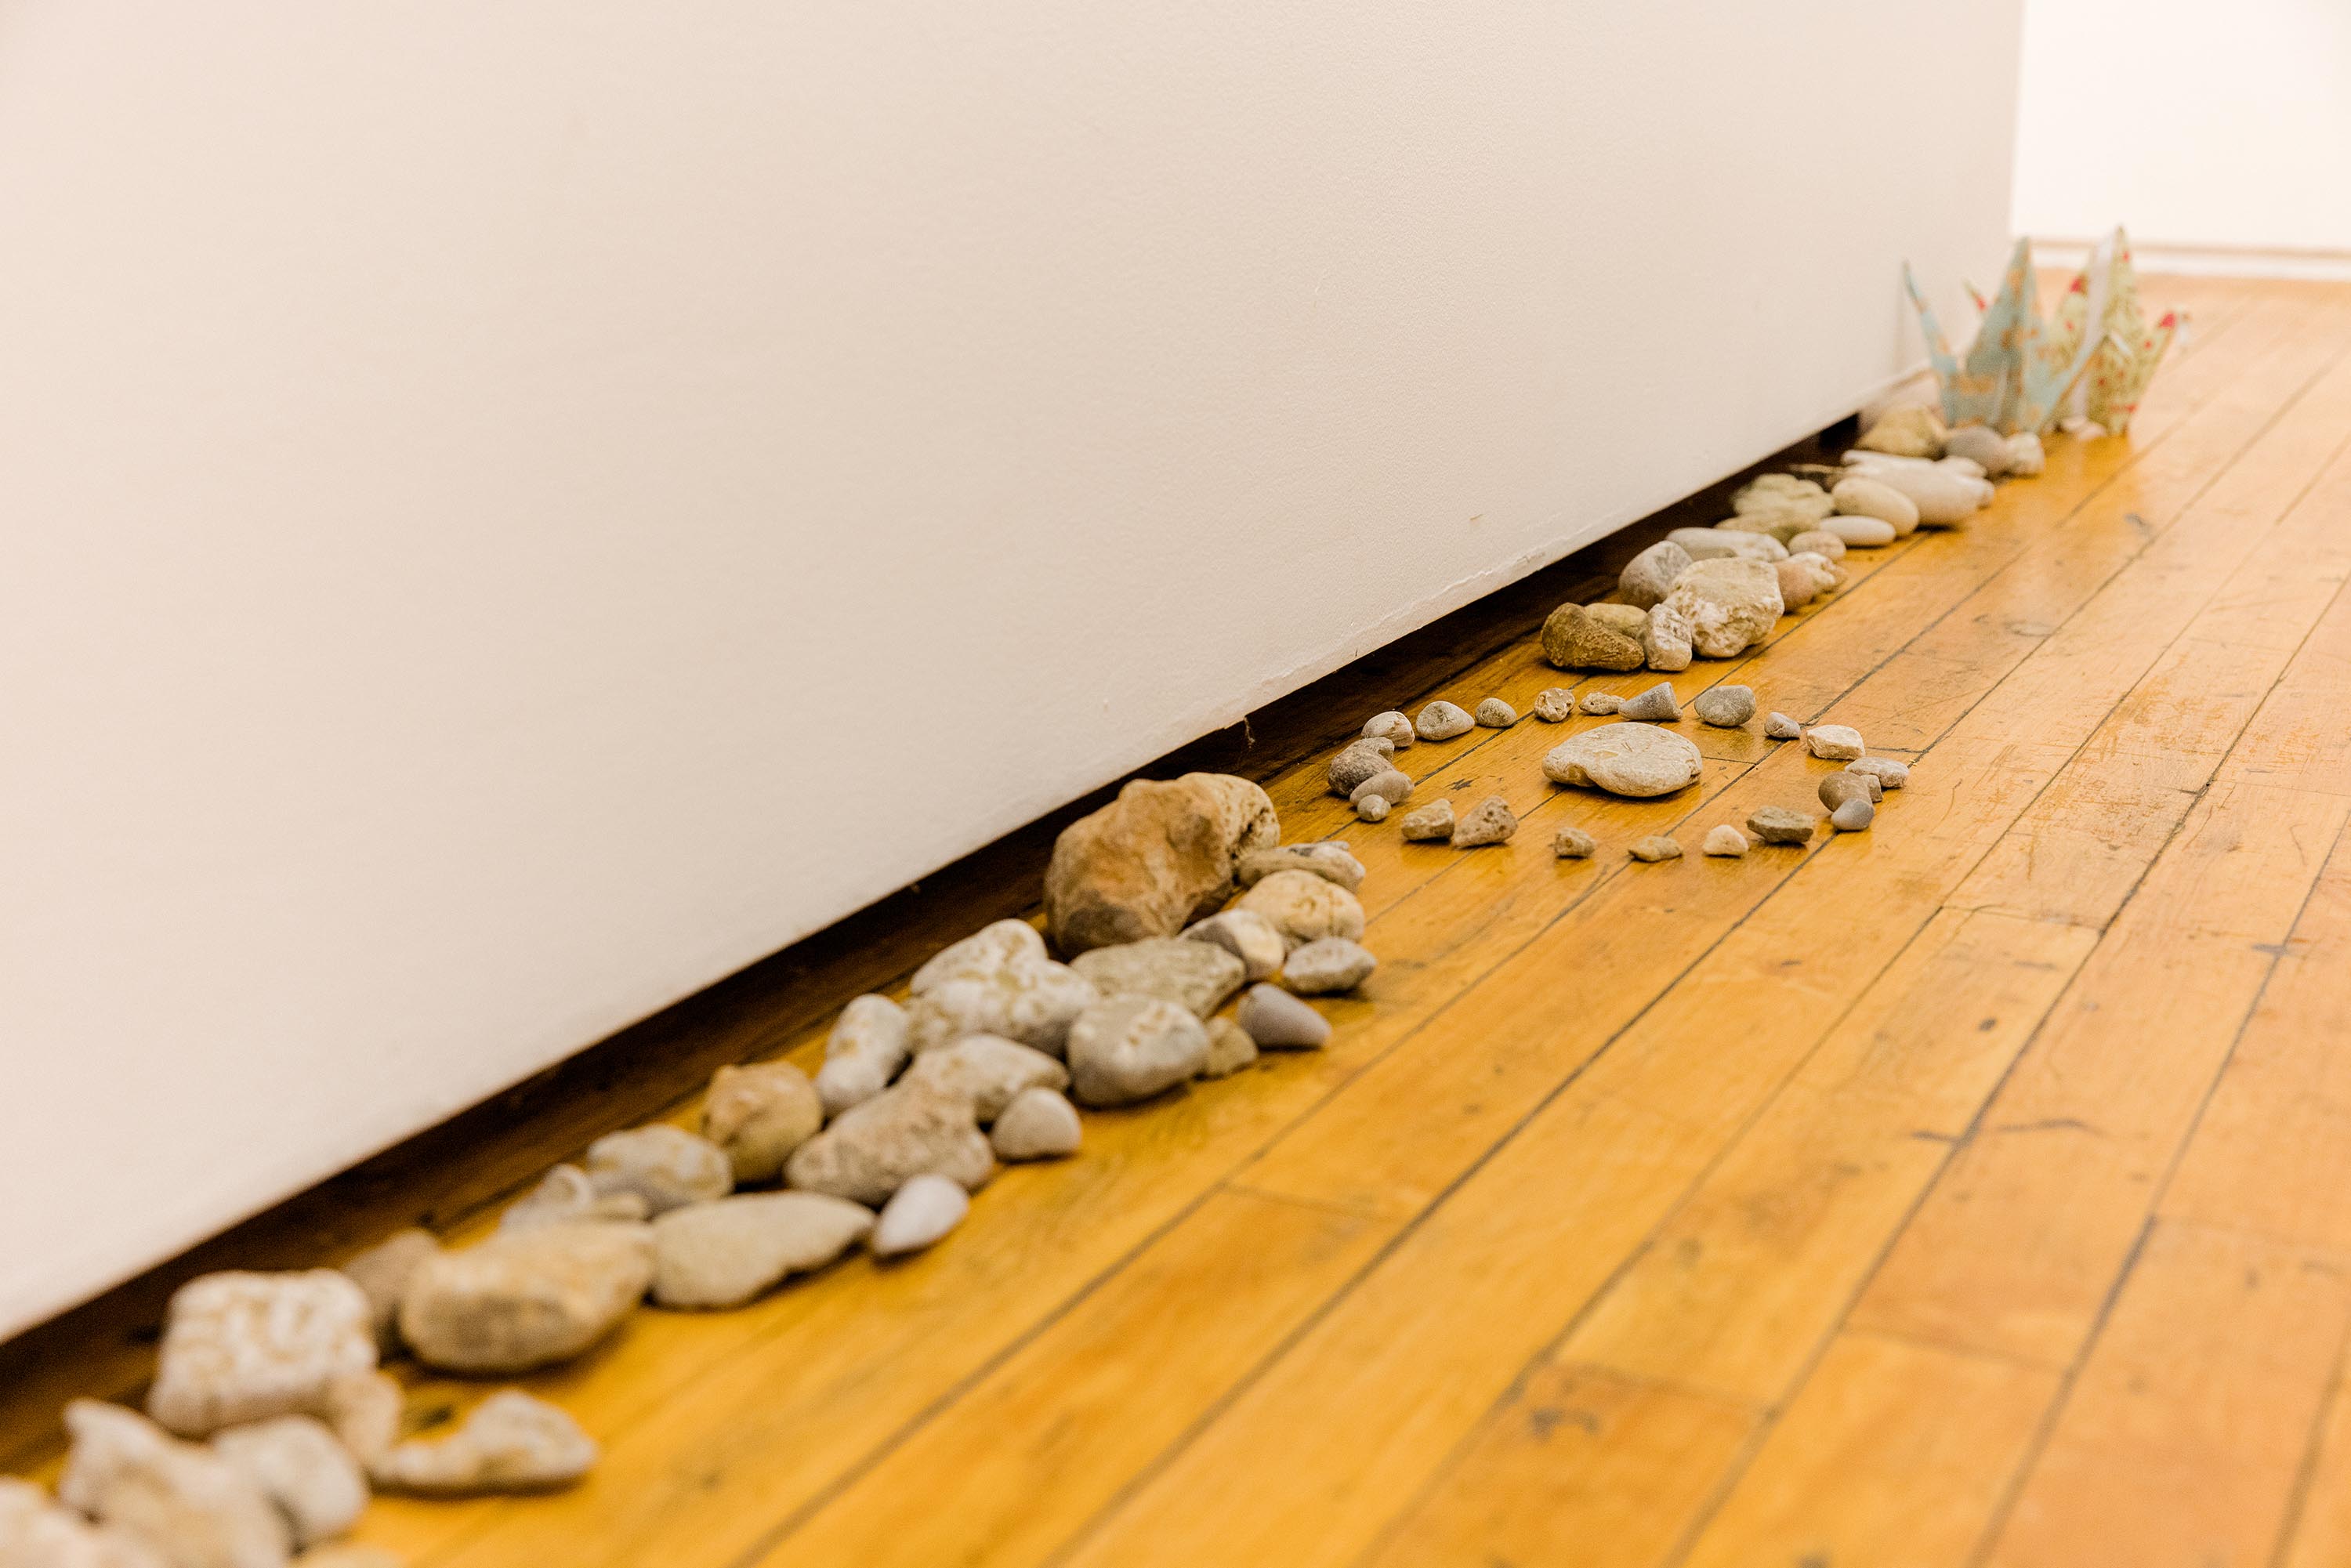 Many small stones arranged against a gallery wall. A ring of stones sits in the middle.